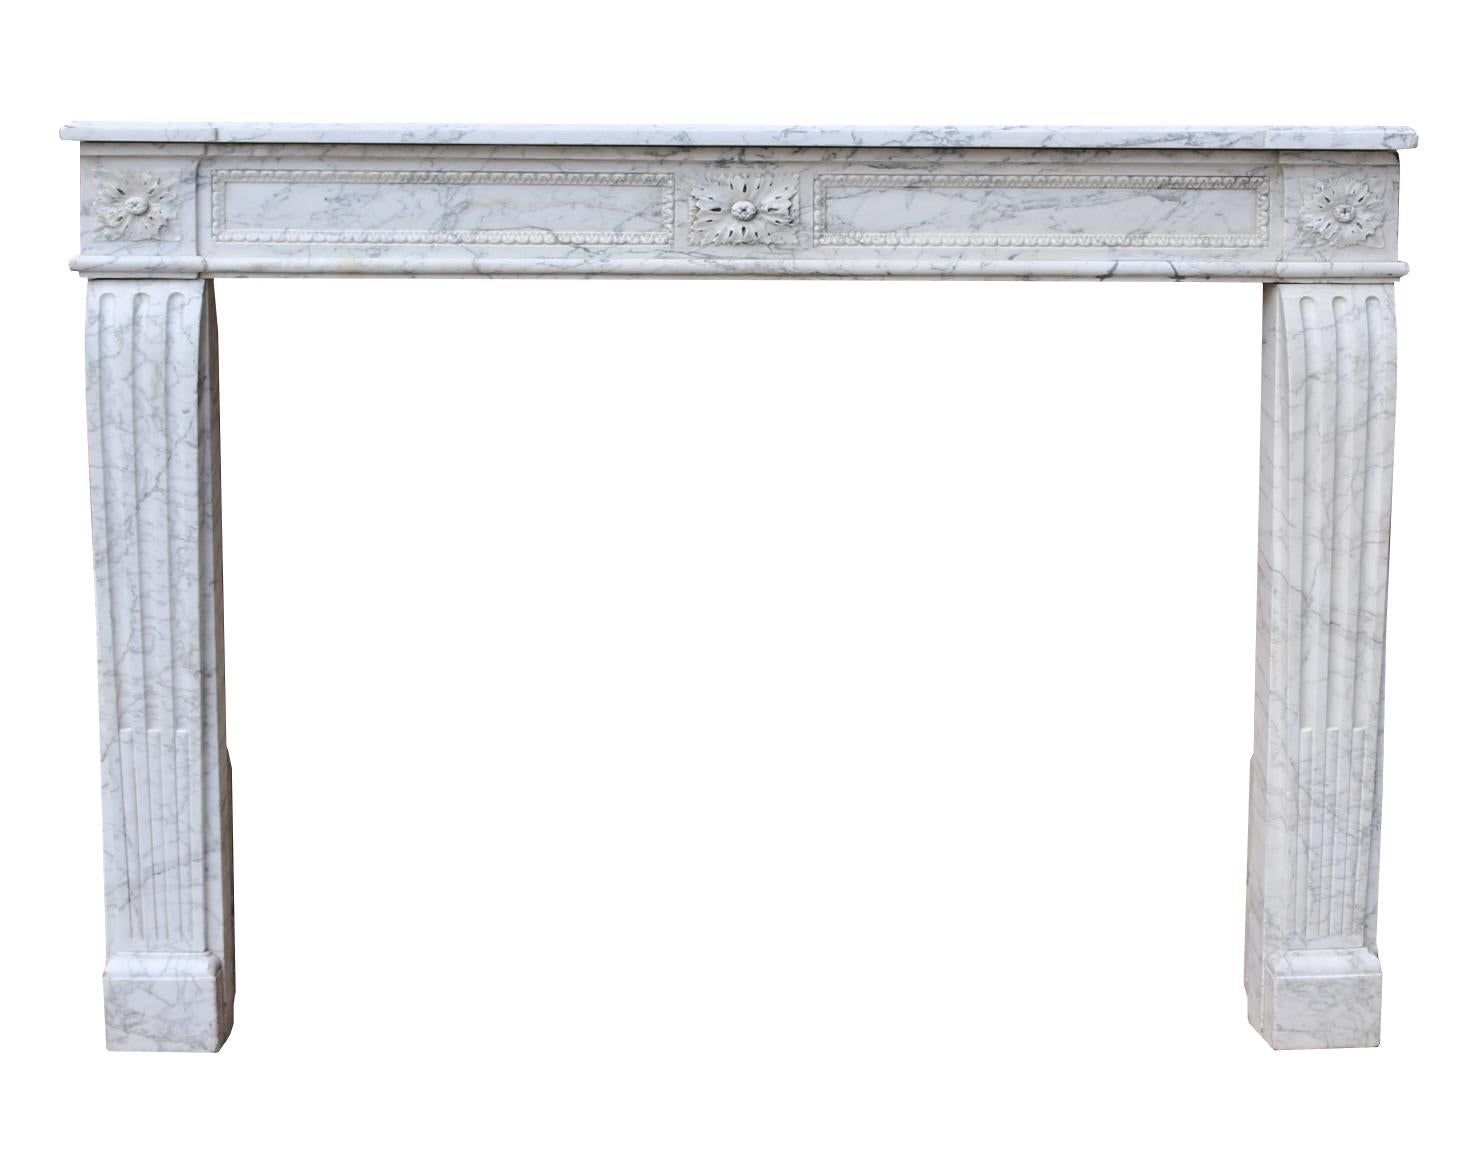 A Louis XVI fireplace surround in Carrara marble, with a floral paterae centred on the panelled frieze and echoed on the end blocks which are set above stop fluted jambs resting on small foot blocks.

Additional dimensions:

Opening height 95.5